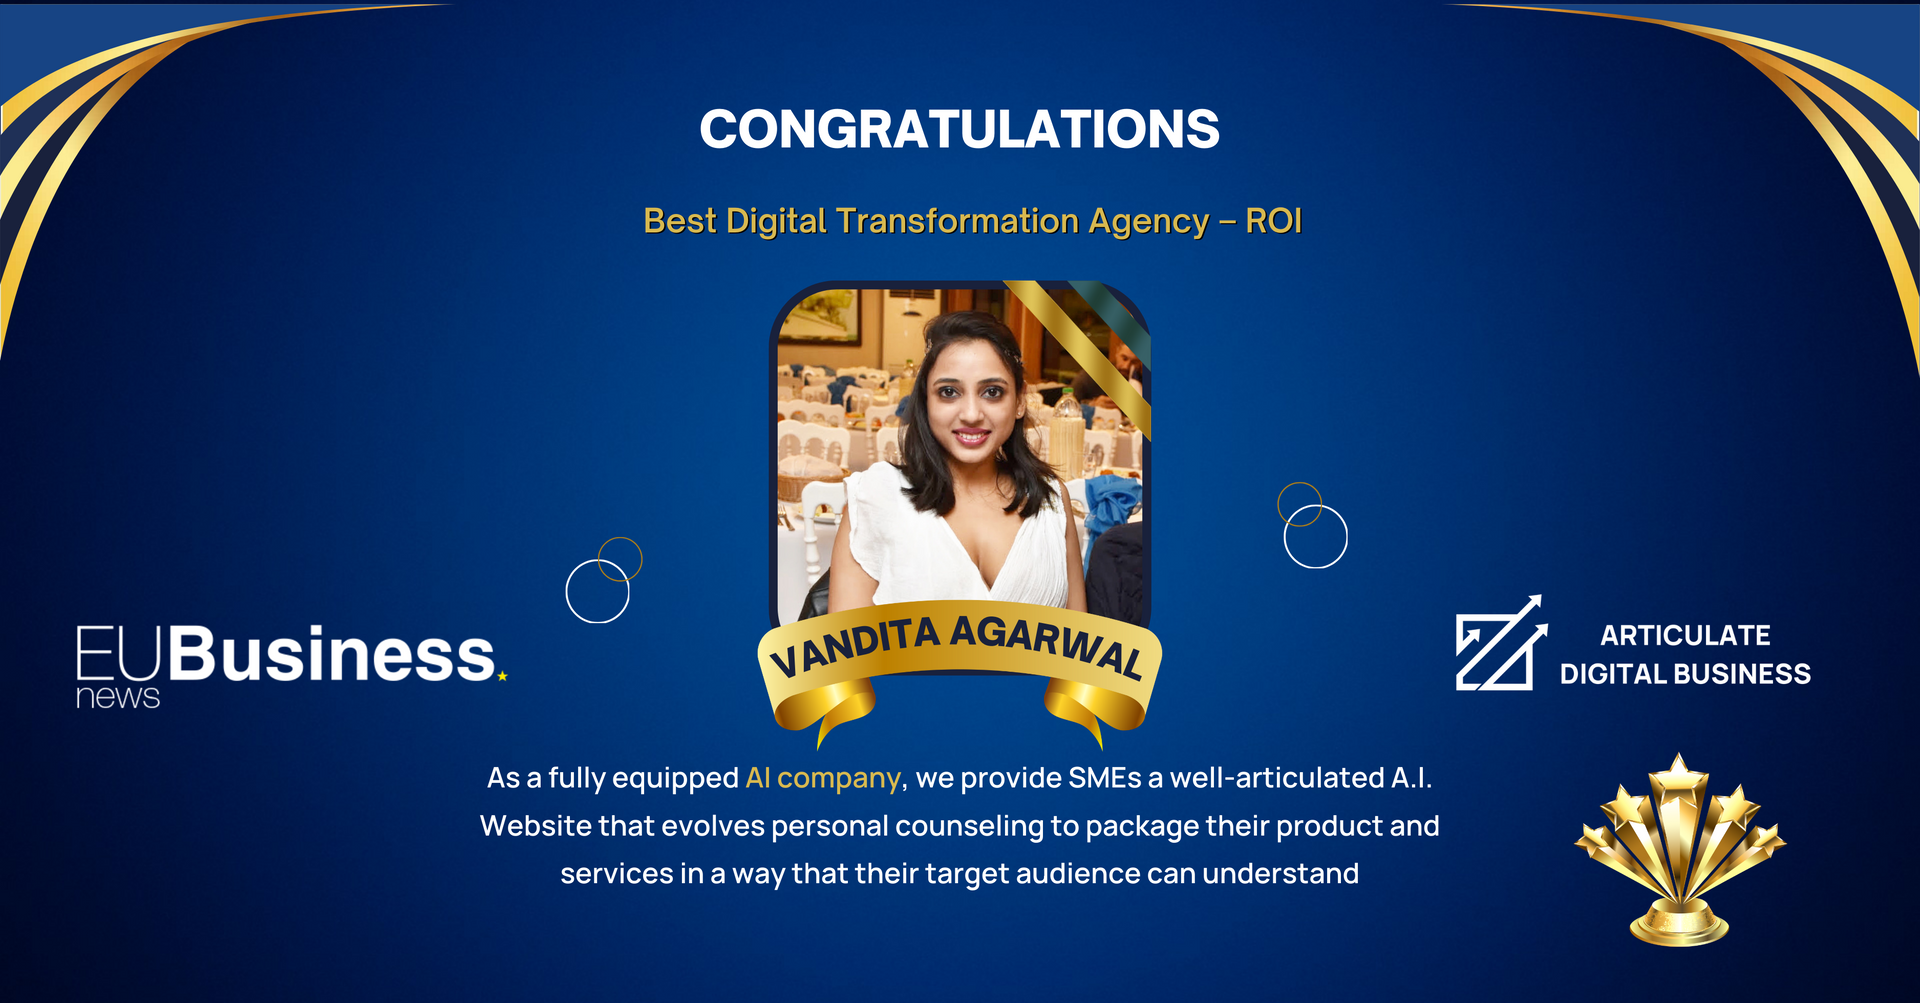 Articulate Digital Business, the leading digital transformation agency awarded by EU Business News